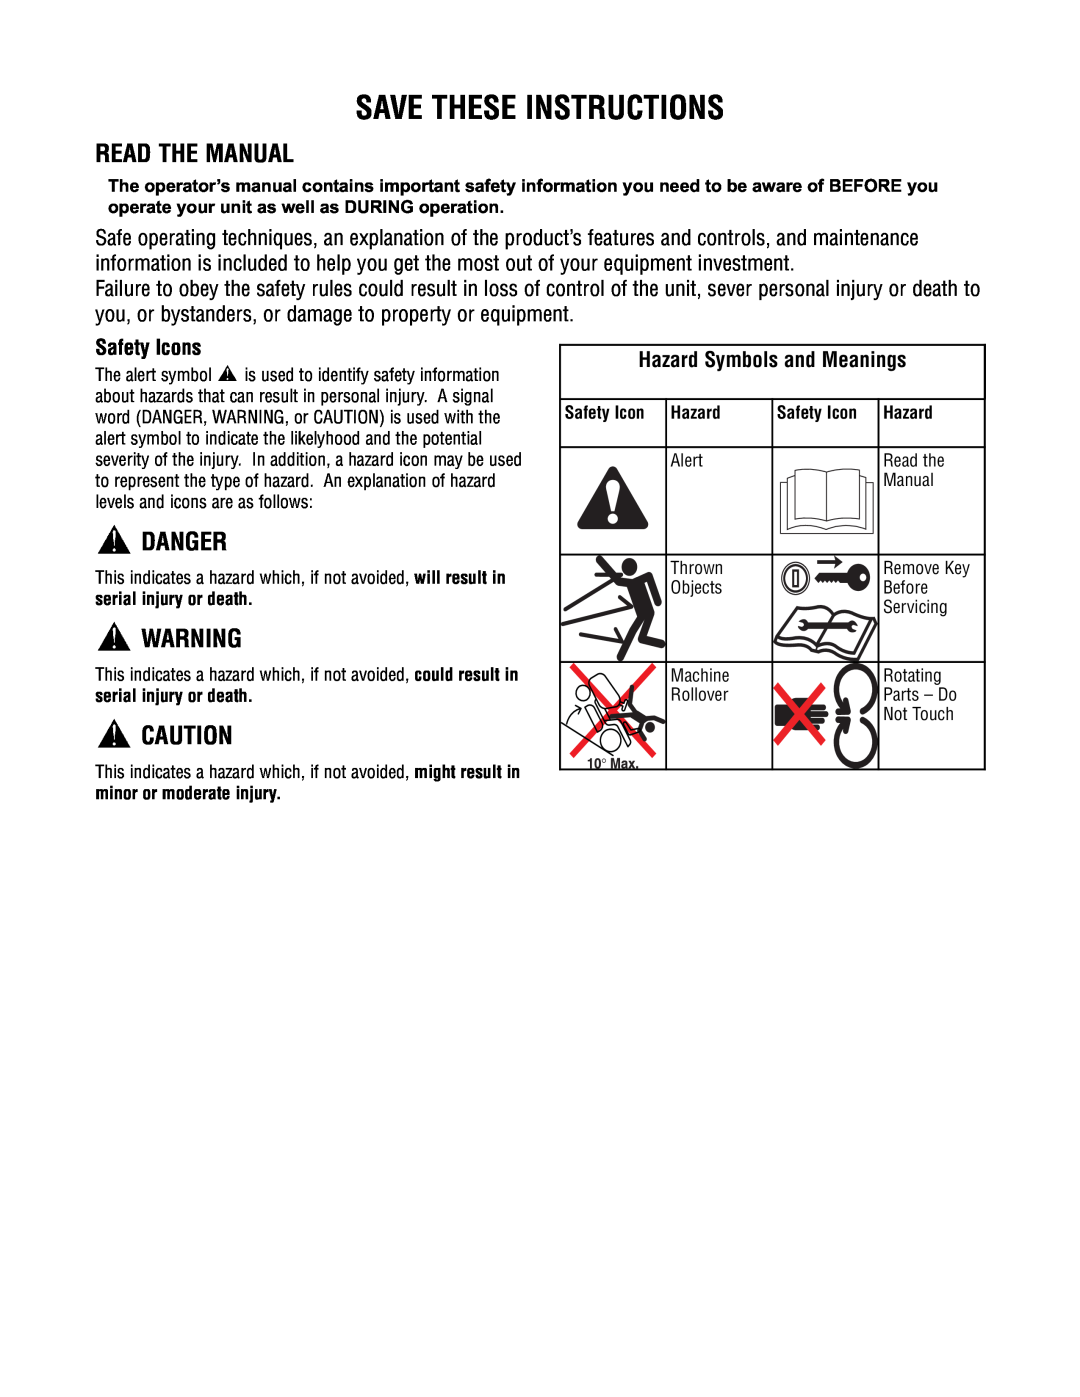 Briggs & Stratton 1695354 Save These Instructions, Read The Manual, Danger, Safety Icons, Hazard Symbols and Meanings 